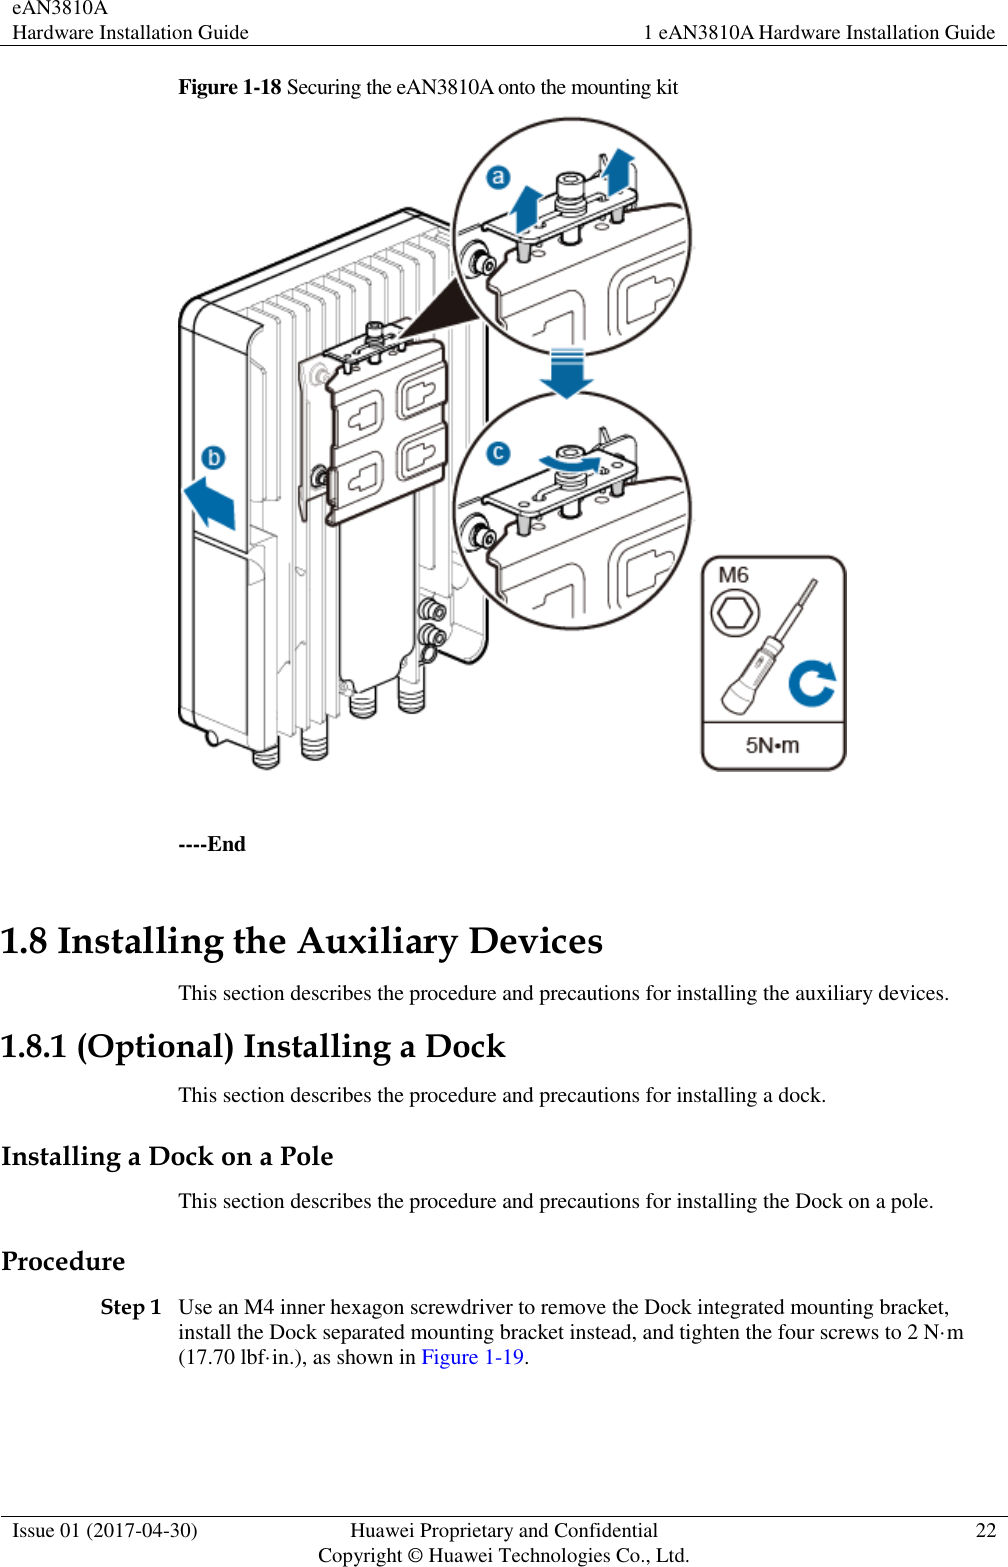 eAN3810A   Hardware Installation Guide 1 eAN3810A Hardware Installation Guide  Issue 01 (2017-04-30) Huawei Proprietary and Confidential                                     Copyright © Huawei Technologies Co., Ltd. 22  Figure 1-18 Securing the eAN3810A onto the mounting kit   ----End 1.8 Installing the Auxiliary Devices This section describes the procedure and precautions for installing the auxiliary devices. 1.8.1 (Optional) Installing a Dock This section describes the procedure and precautions for installing a dock. Installing a Dock on a Pole This section describes the procedure and precautions for installing the Dock on a pole. Procedure Step 1 Use an M4 inner hexagon screwdriver to remove the Dock integrated mounting bracket, install the Dock separated mounting bracket instead, and tighten the four screws to 2 N·m (17.70 lbf·in.), as shown in Figure 1-19. 